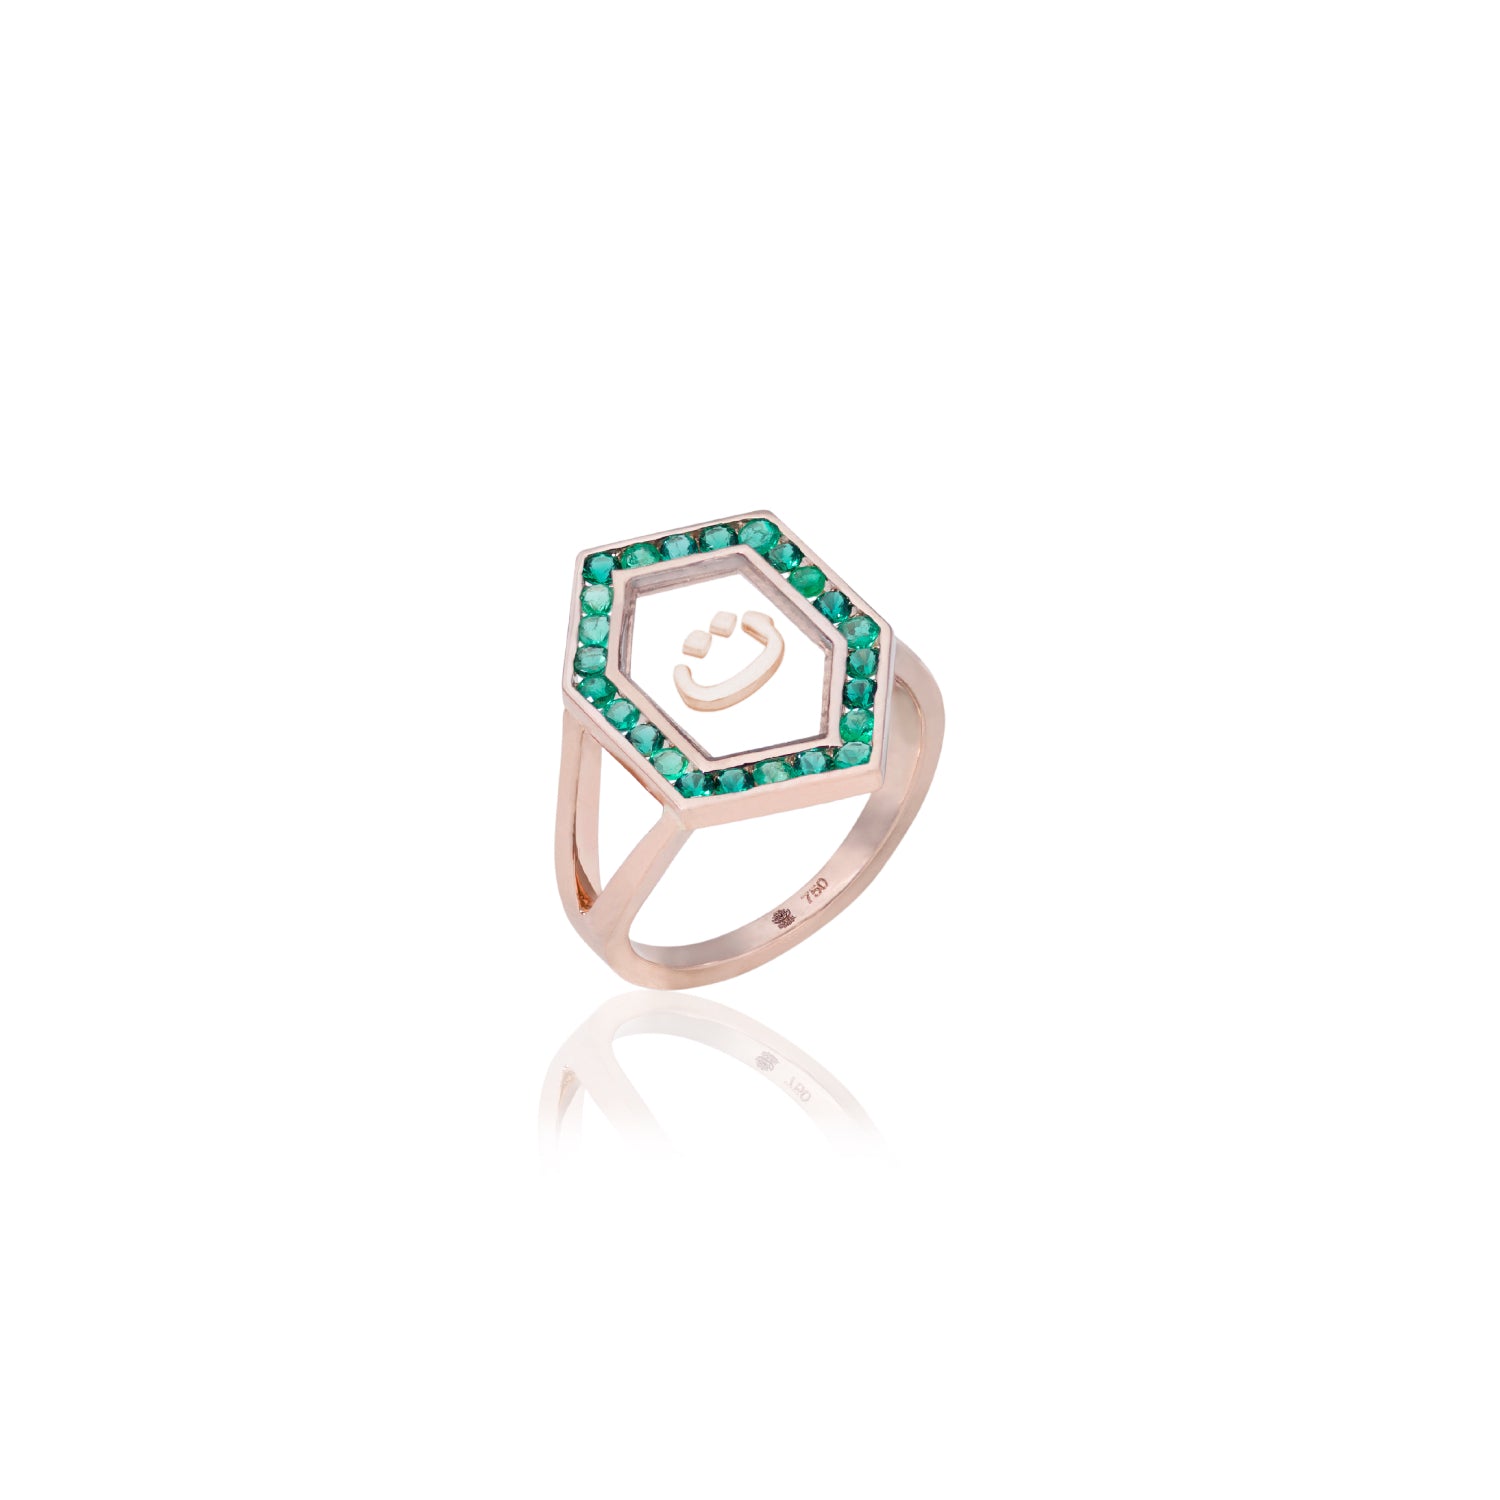 Qamoos 1.0 Letter ت Emerald Ring in Rose Gold